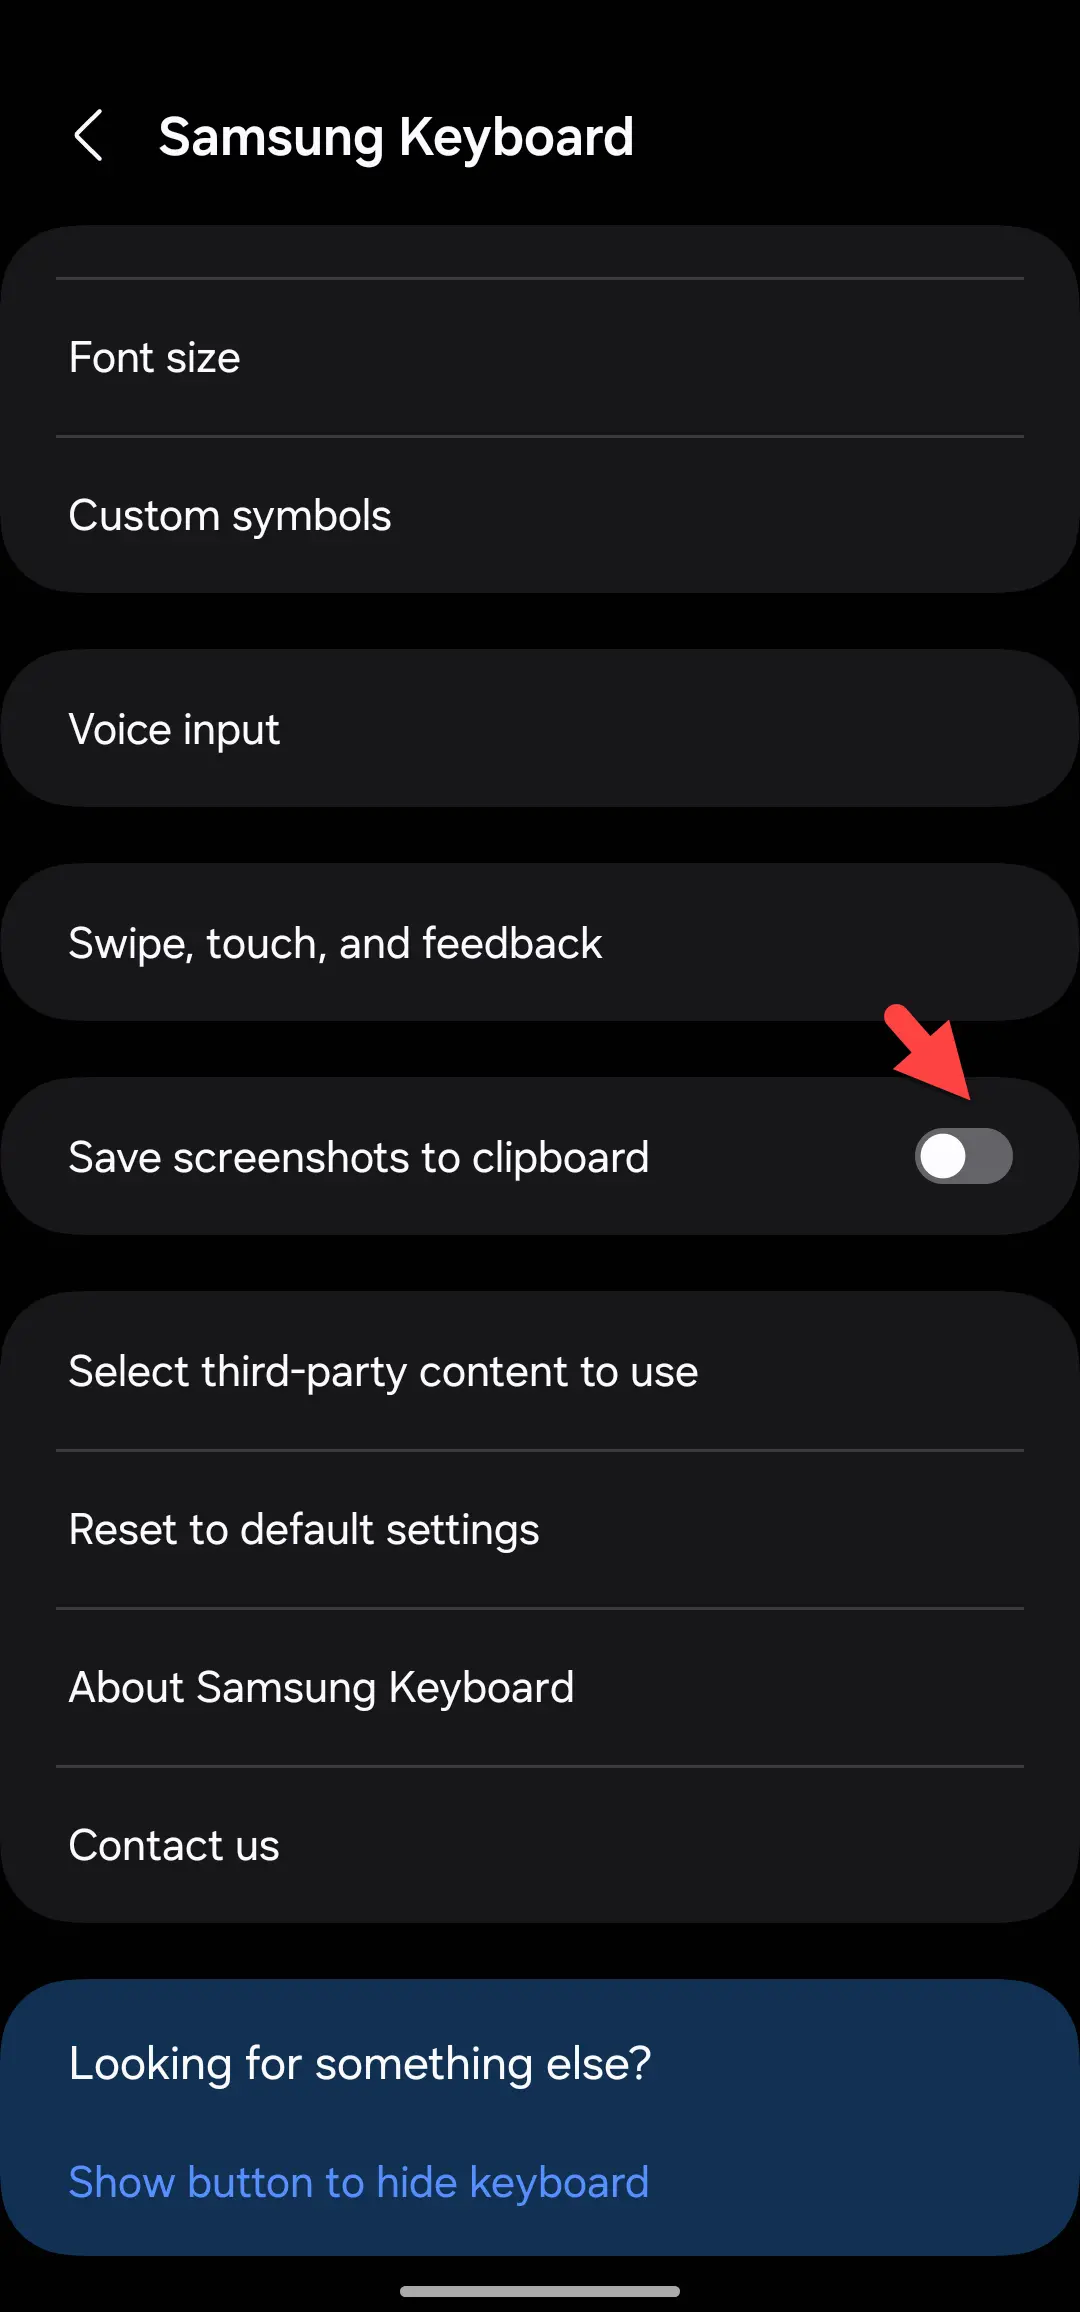 Stop Screenshots From Being Saved to the Clipboard on Samsung